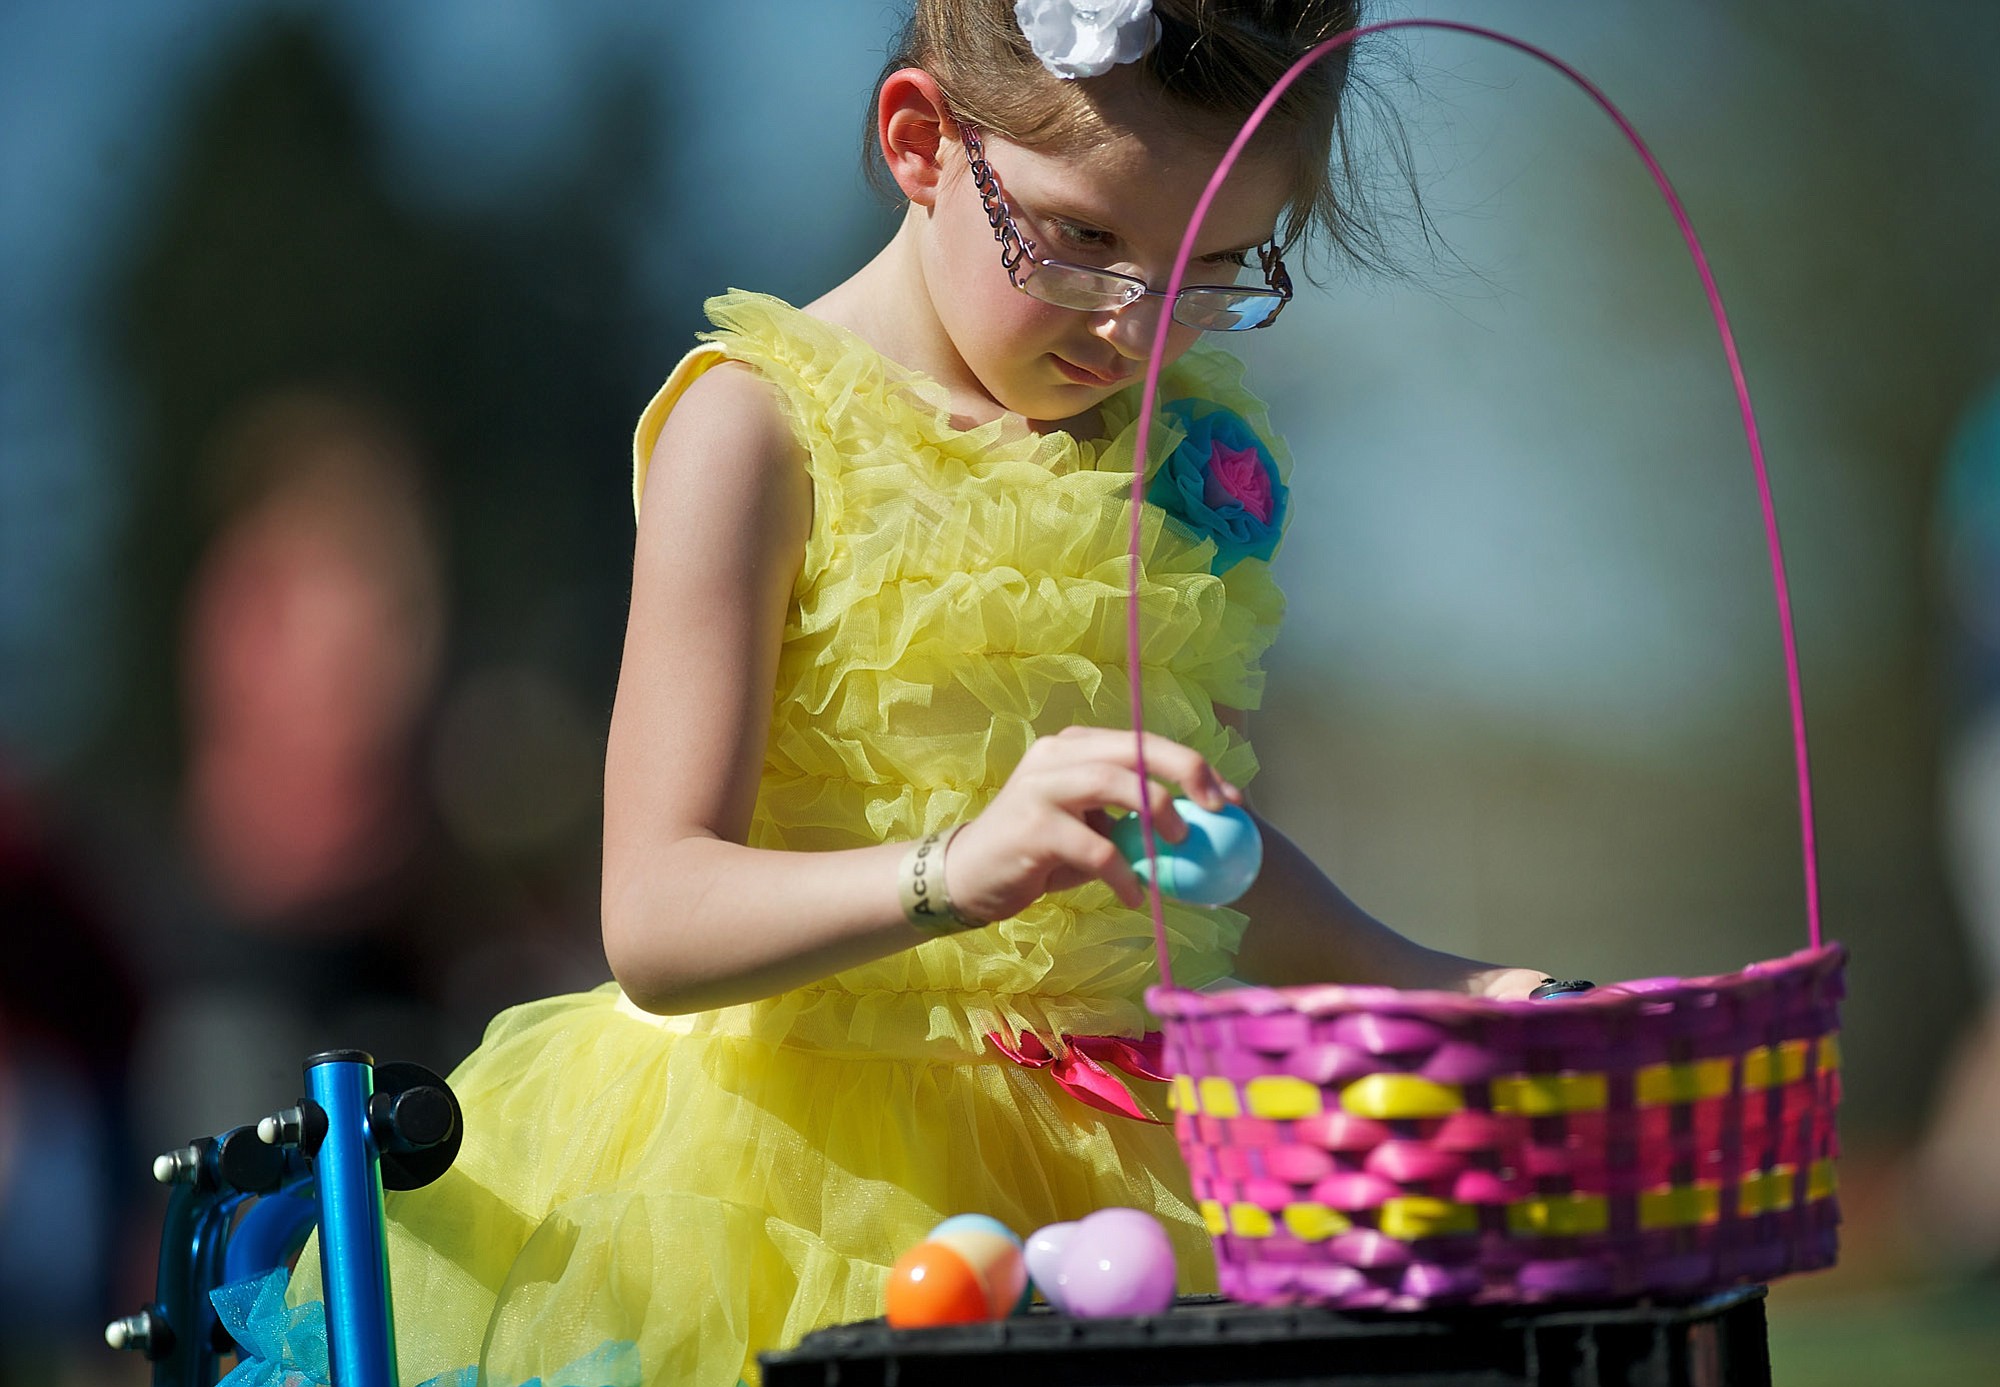 Olivia Hughes, 5, carefully plucks an Easter egg placed on stacked milk cartons.